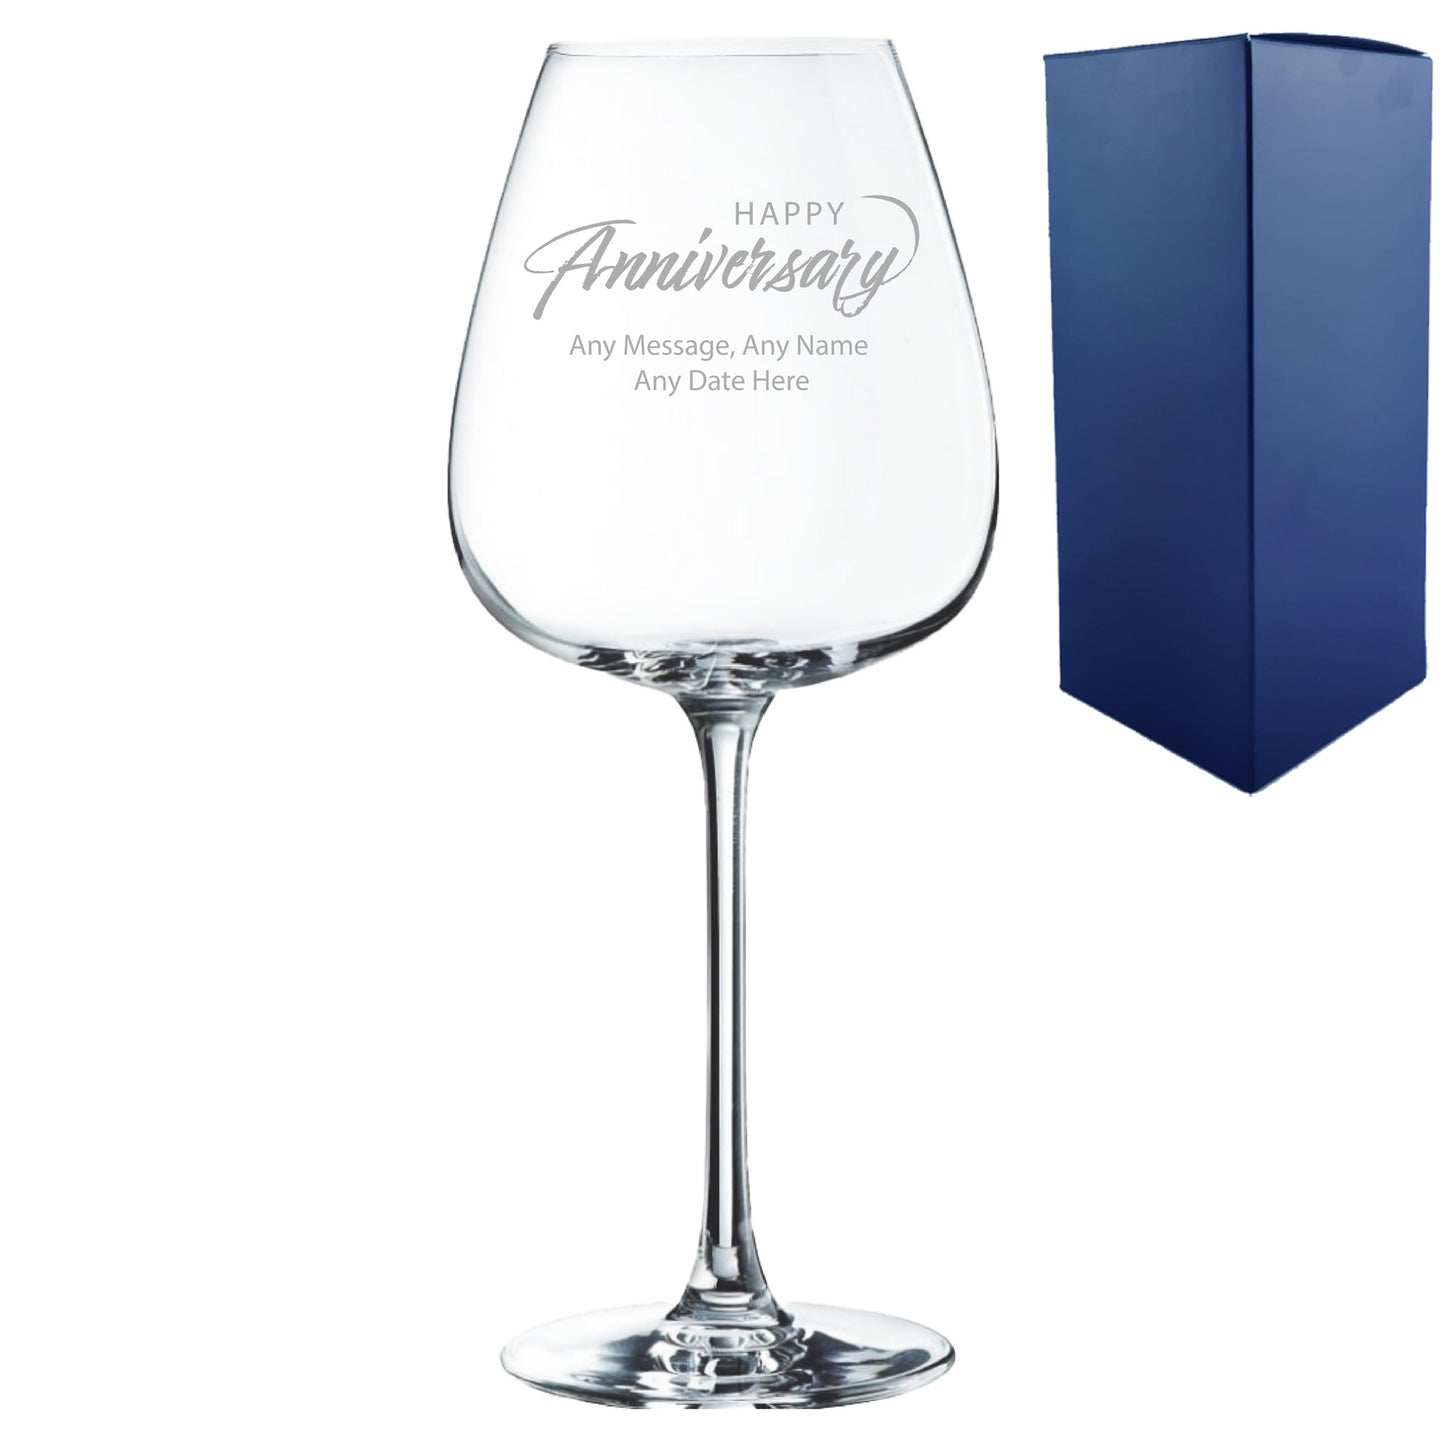 Engraved Happy Anniversary Wine Glass, Any Message, 12oz Cepages, Script Design Image 2